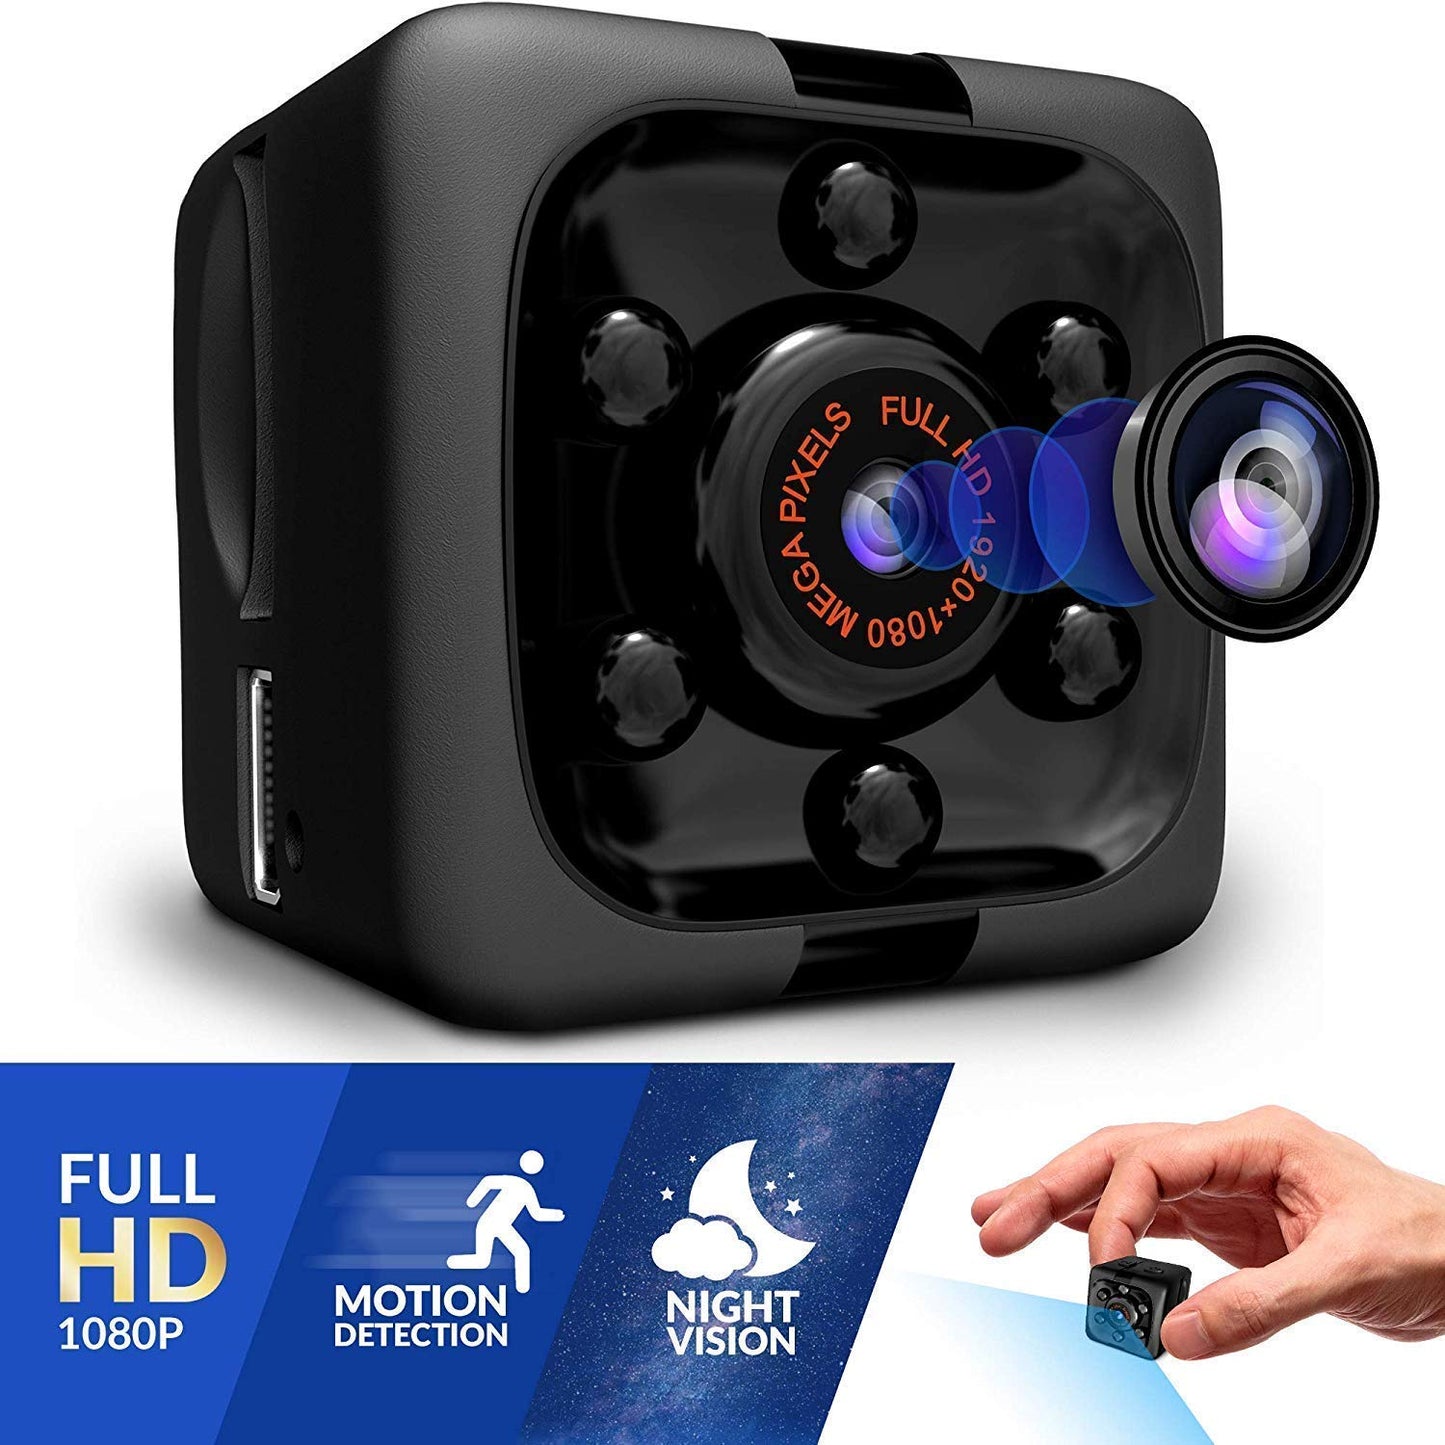 Camera Portable, Full HD Video Recording, 1080P, Night Vision, Motion Detection, Indoor and Outdoor Covert Security Home Ofiice - UproMax